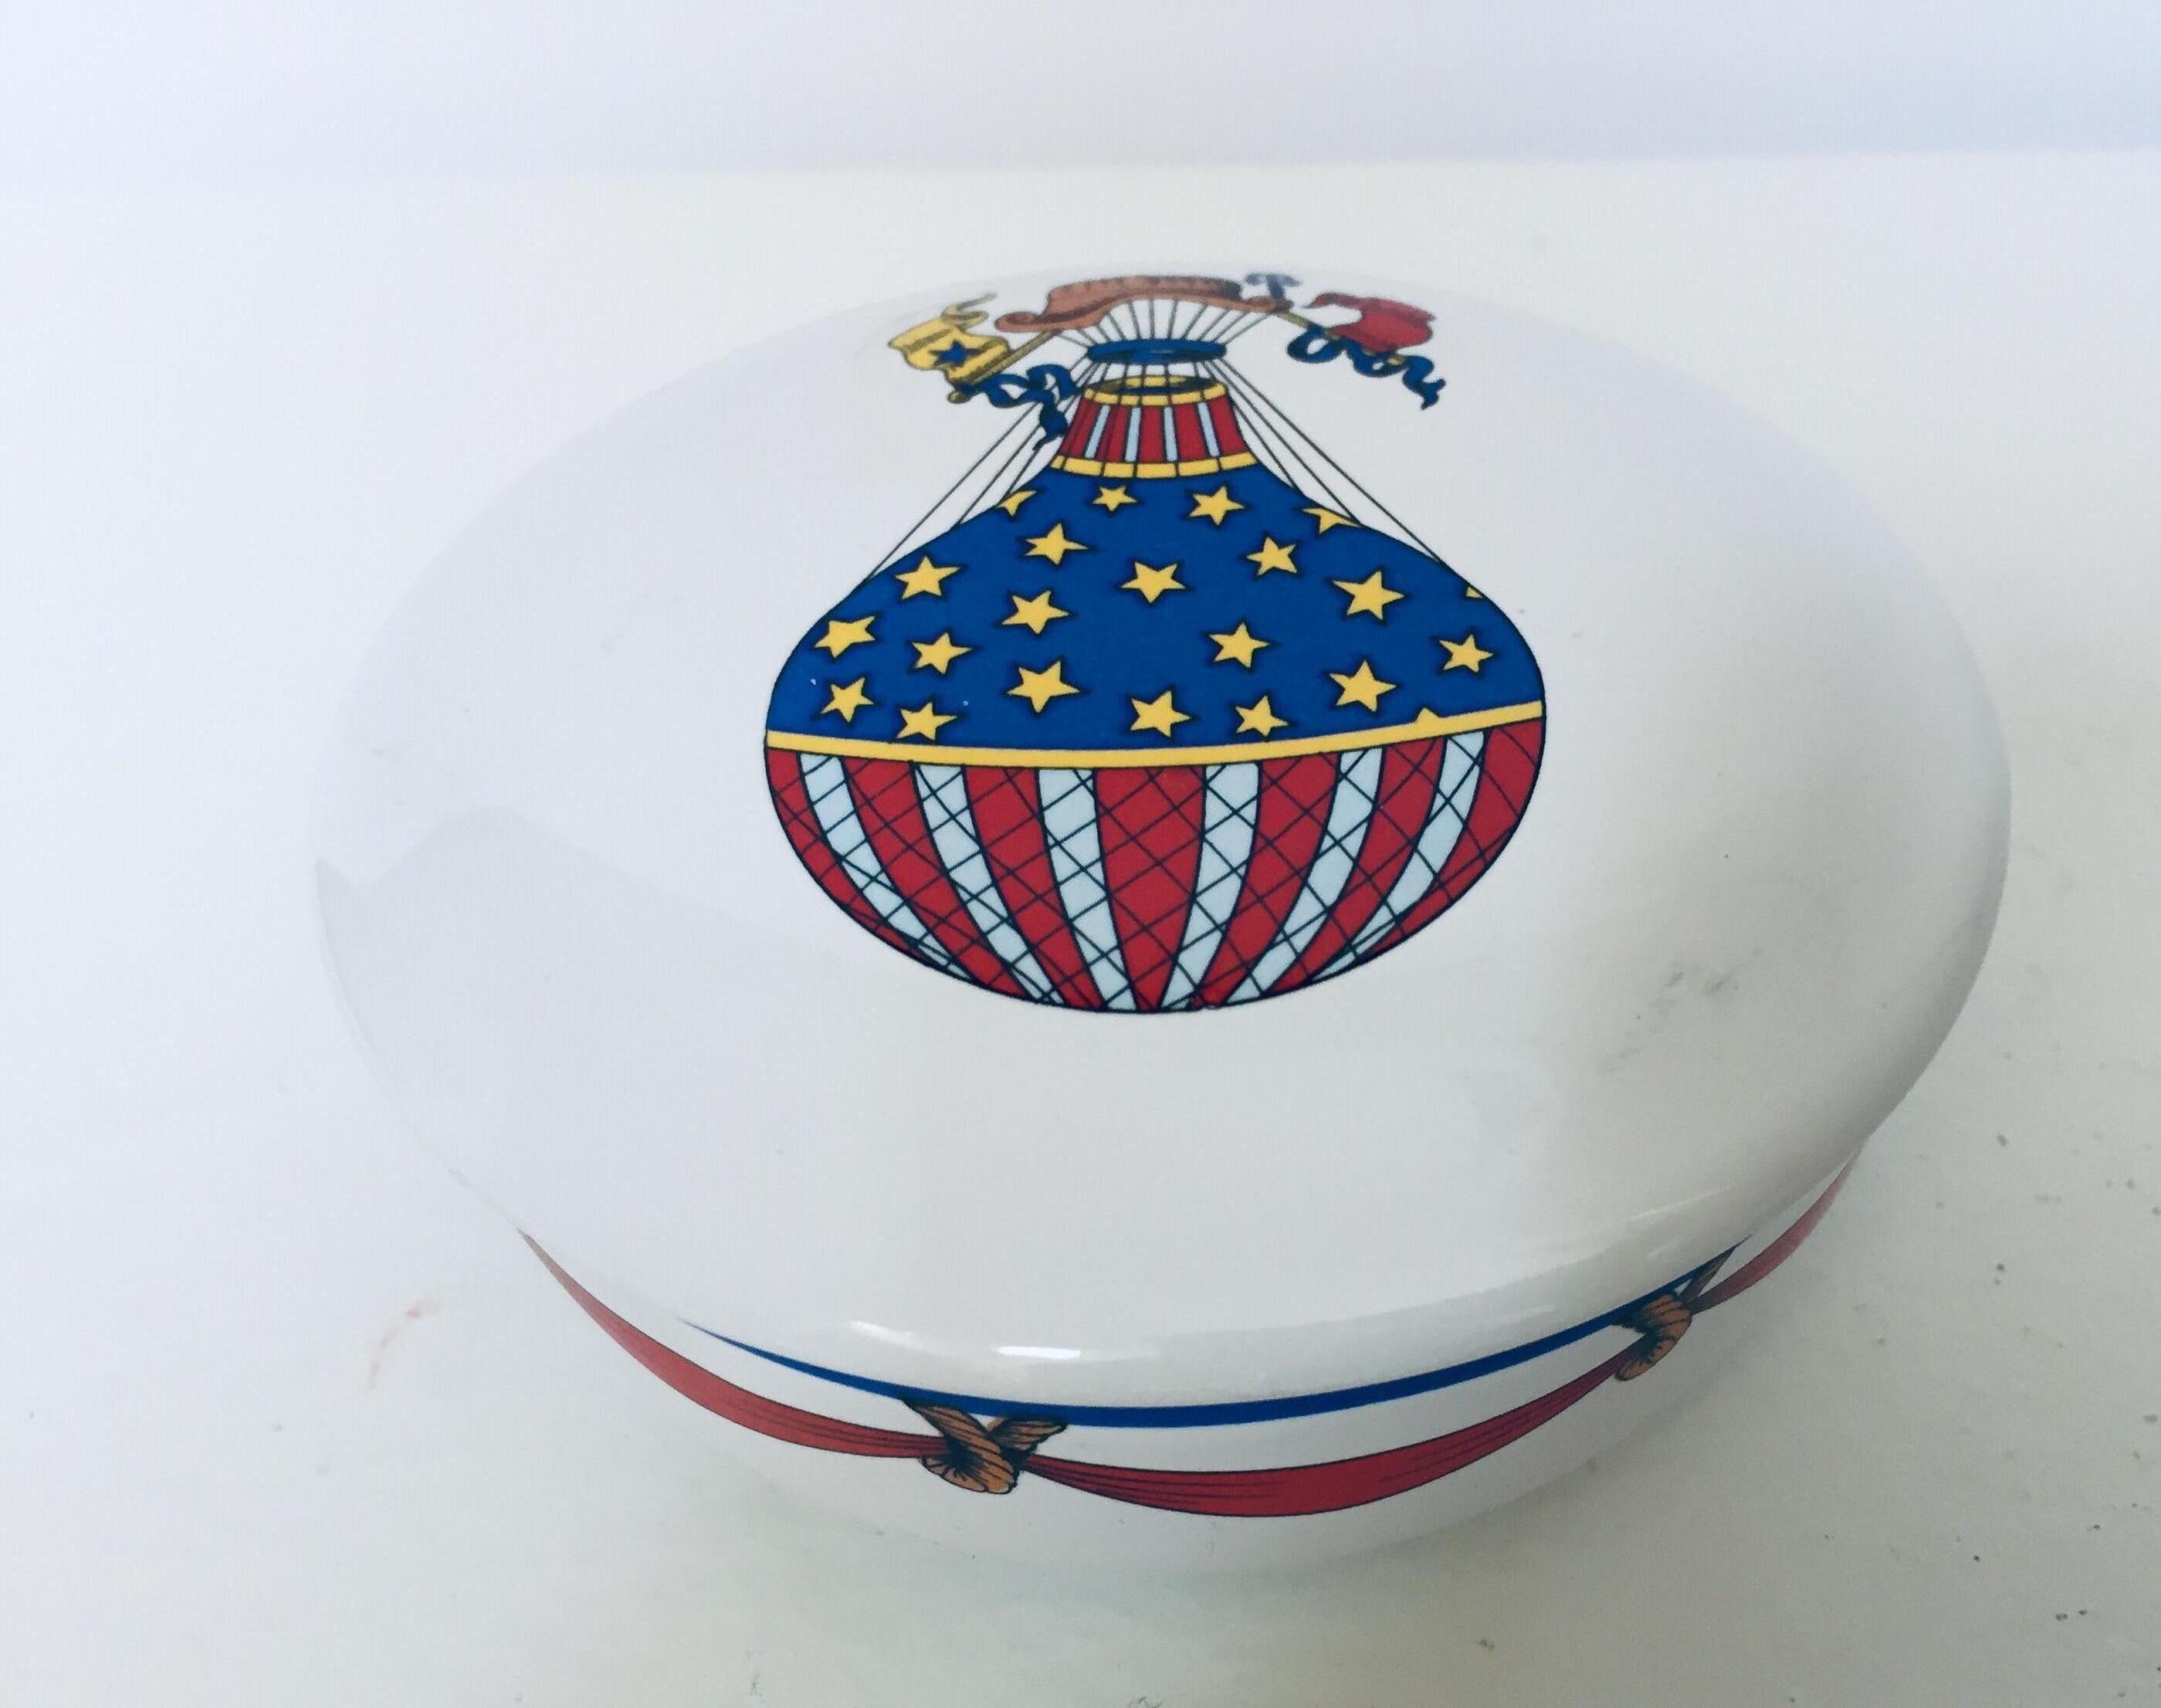 Tiffany & Co. white porcelain round dish, trinket box.
The porcelain lid cover is decorated with a balloon in the American flag colors, red and blue with yellow stars.
The round white porcelain dish was designed by Tiffany & Co.
and made in